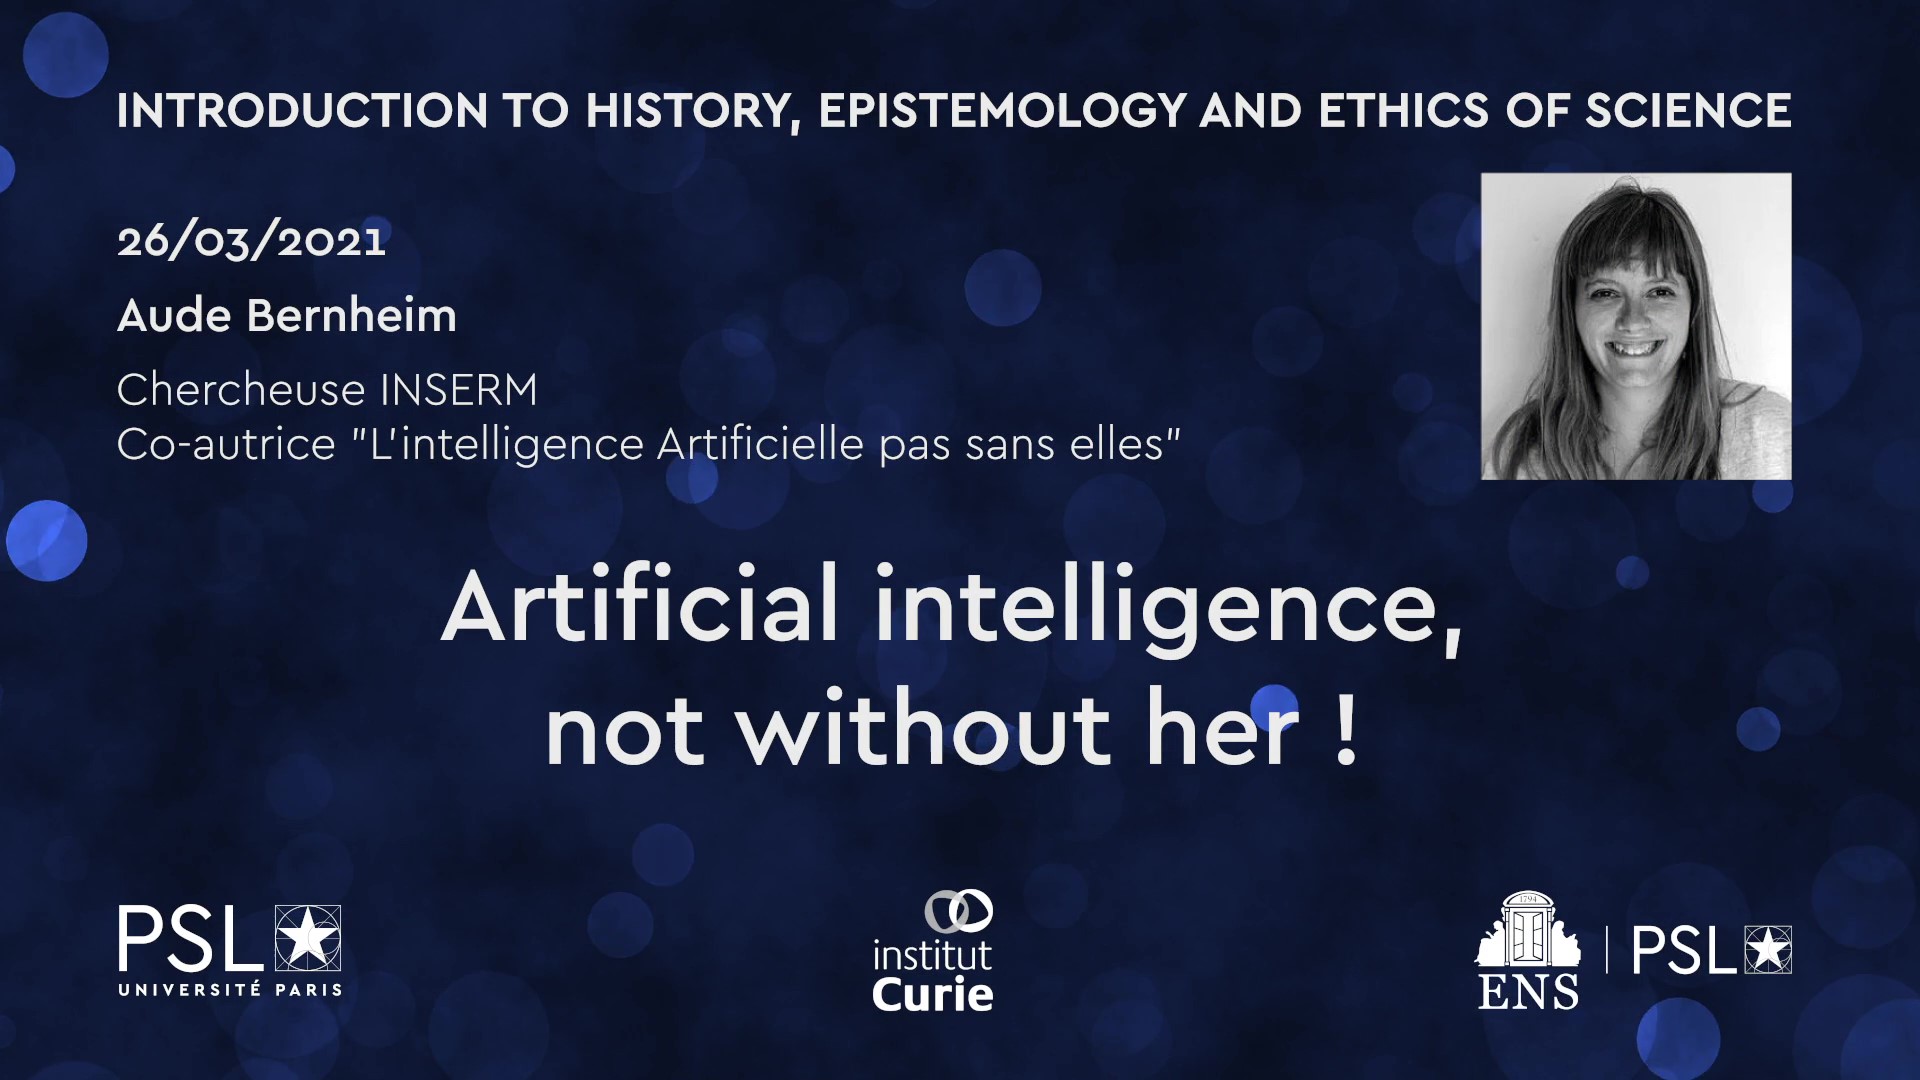 Artificial intelligence, not without her!